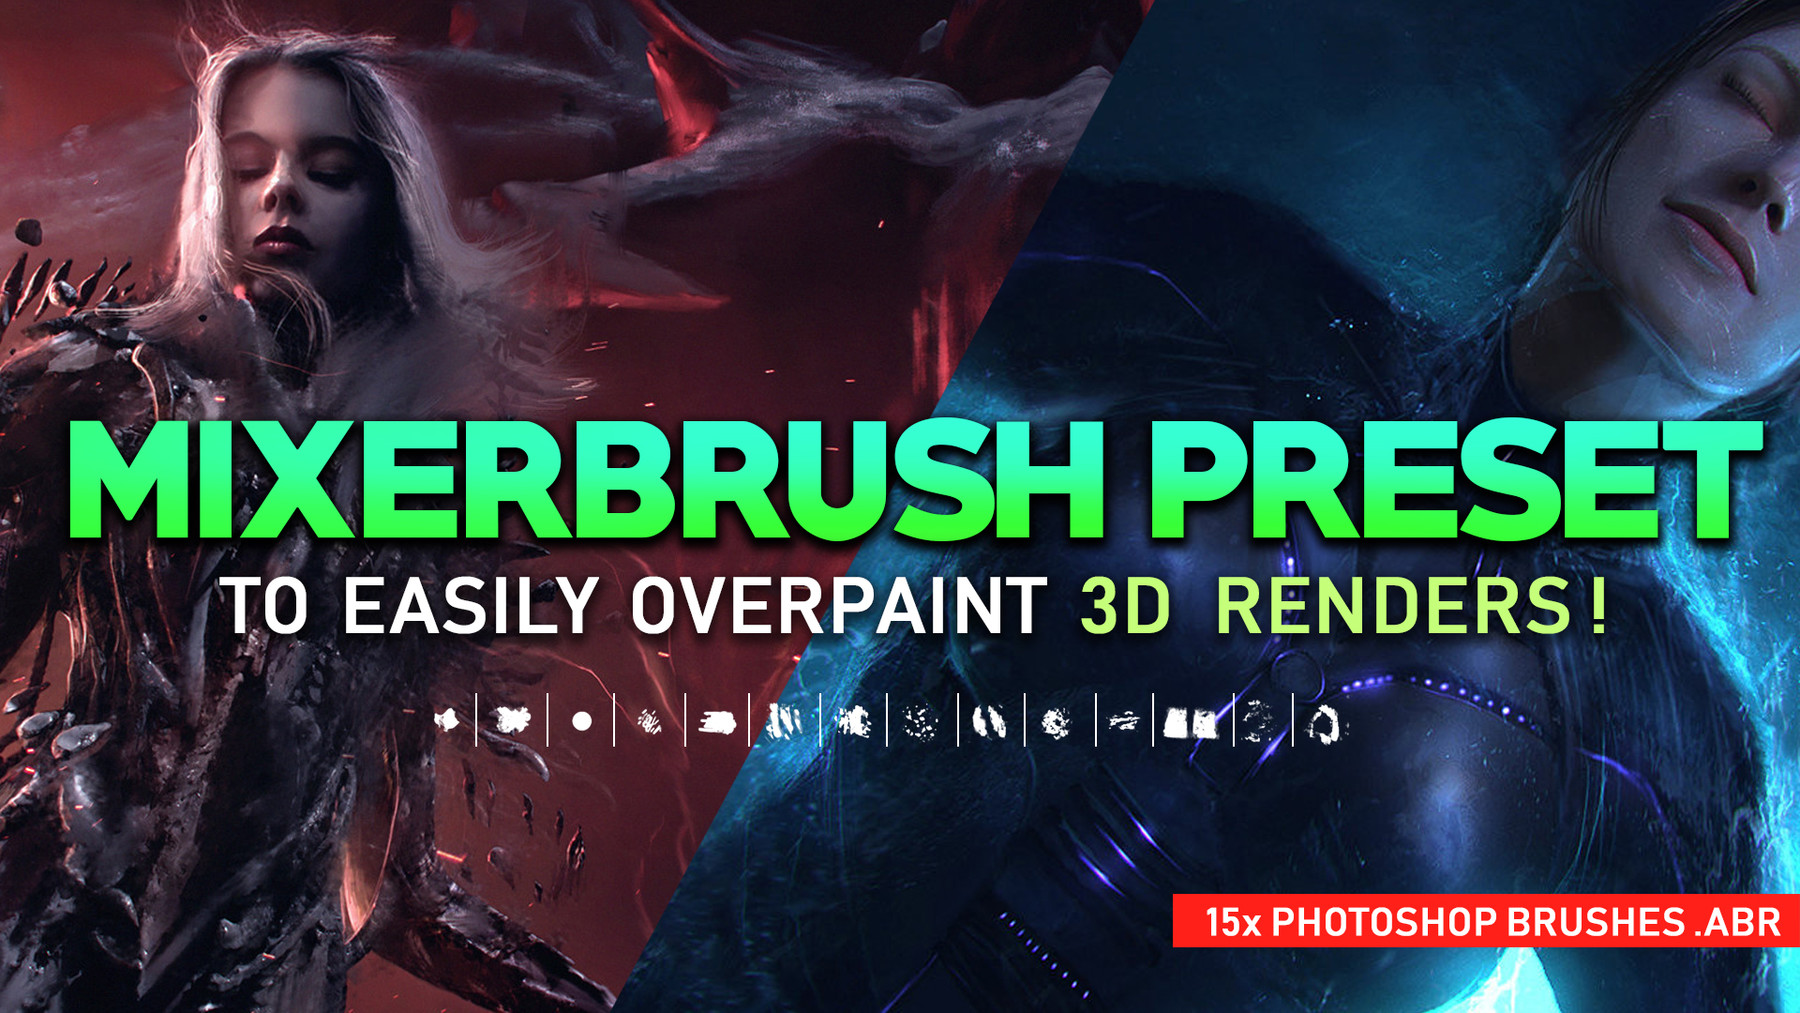 Photoshop mixer brush download twitch after effects cs4 free download